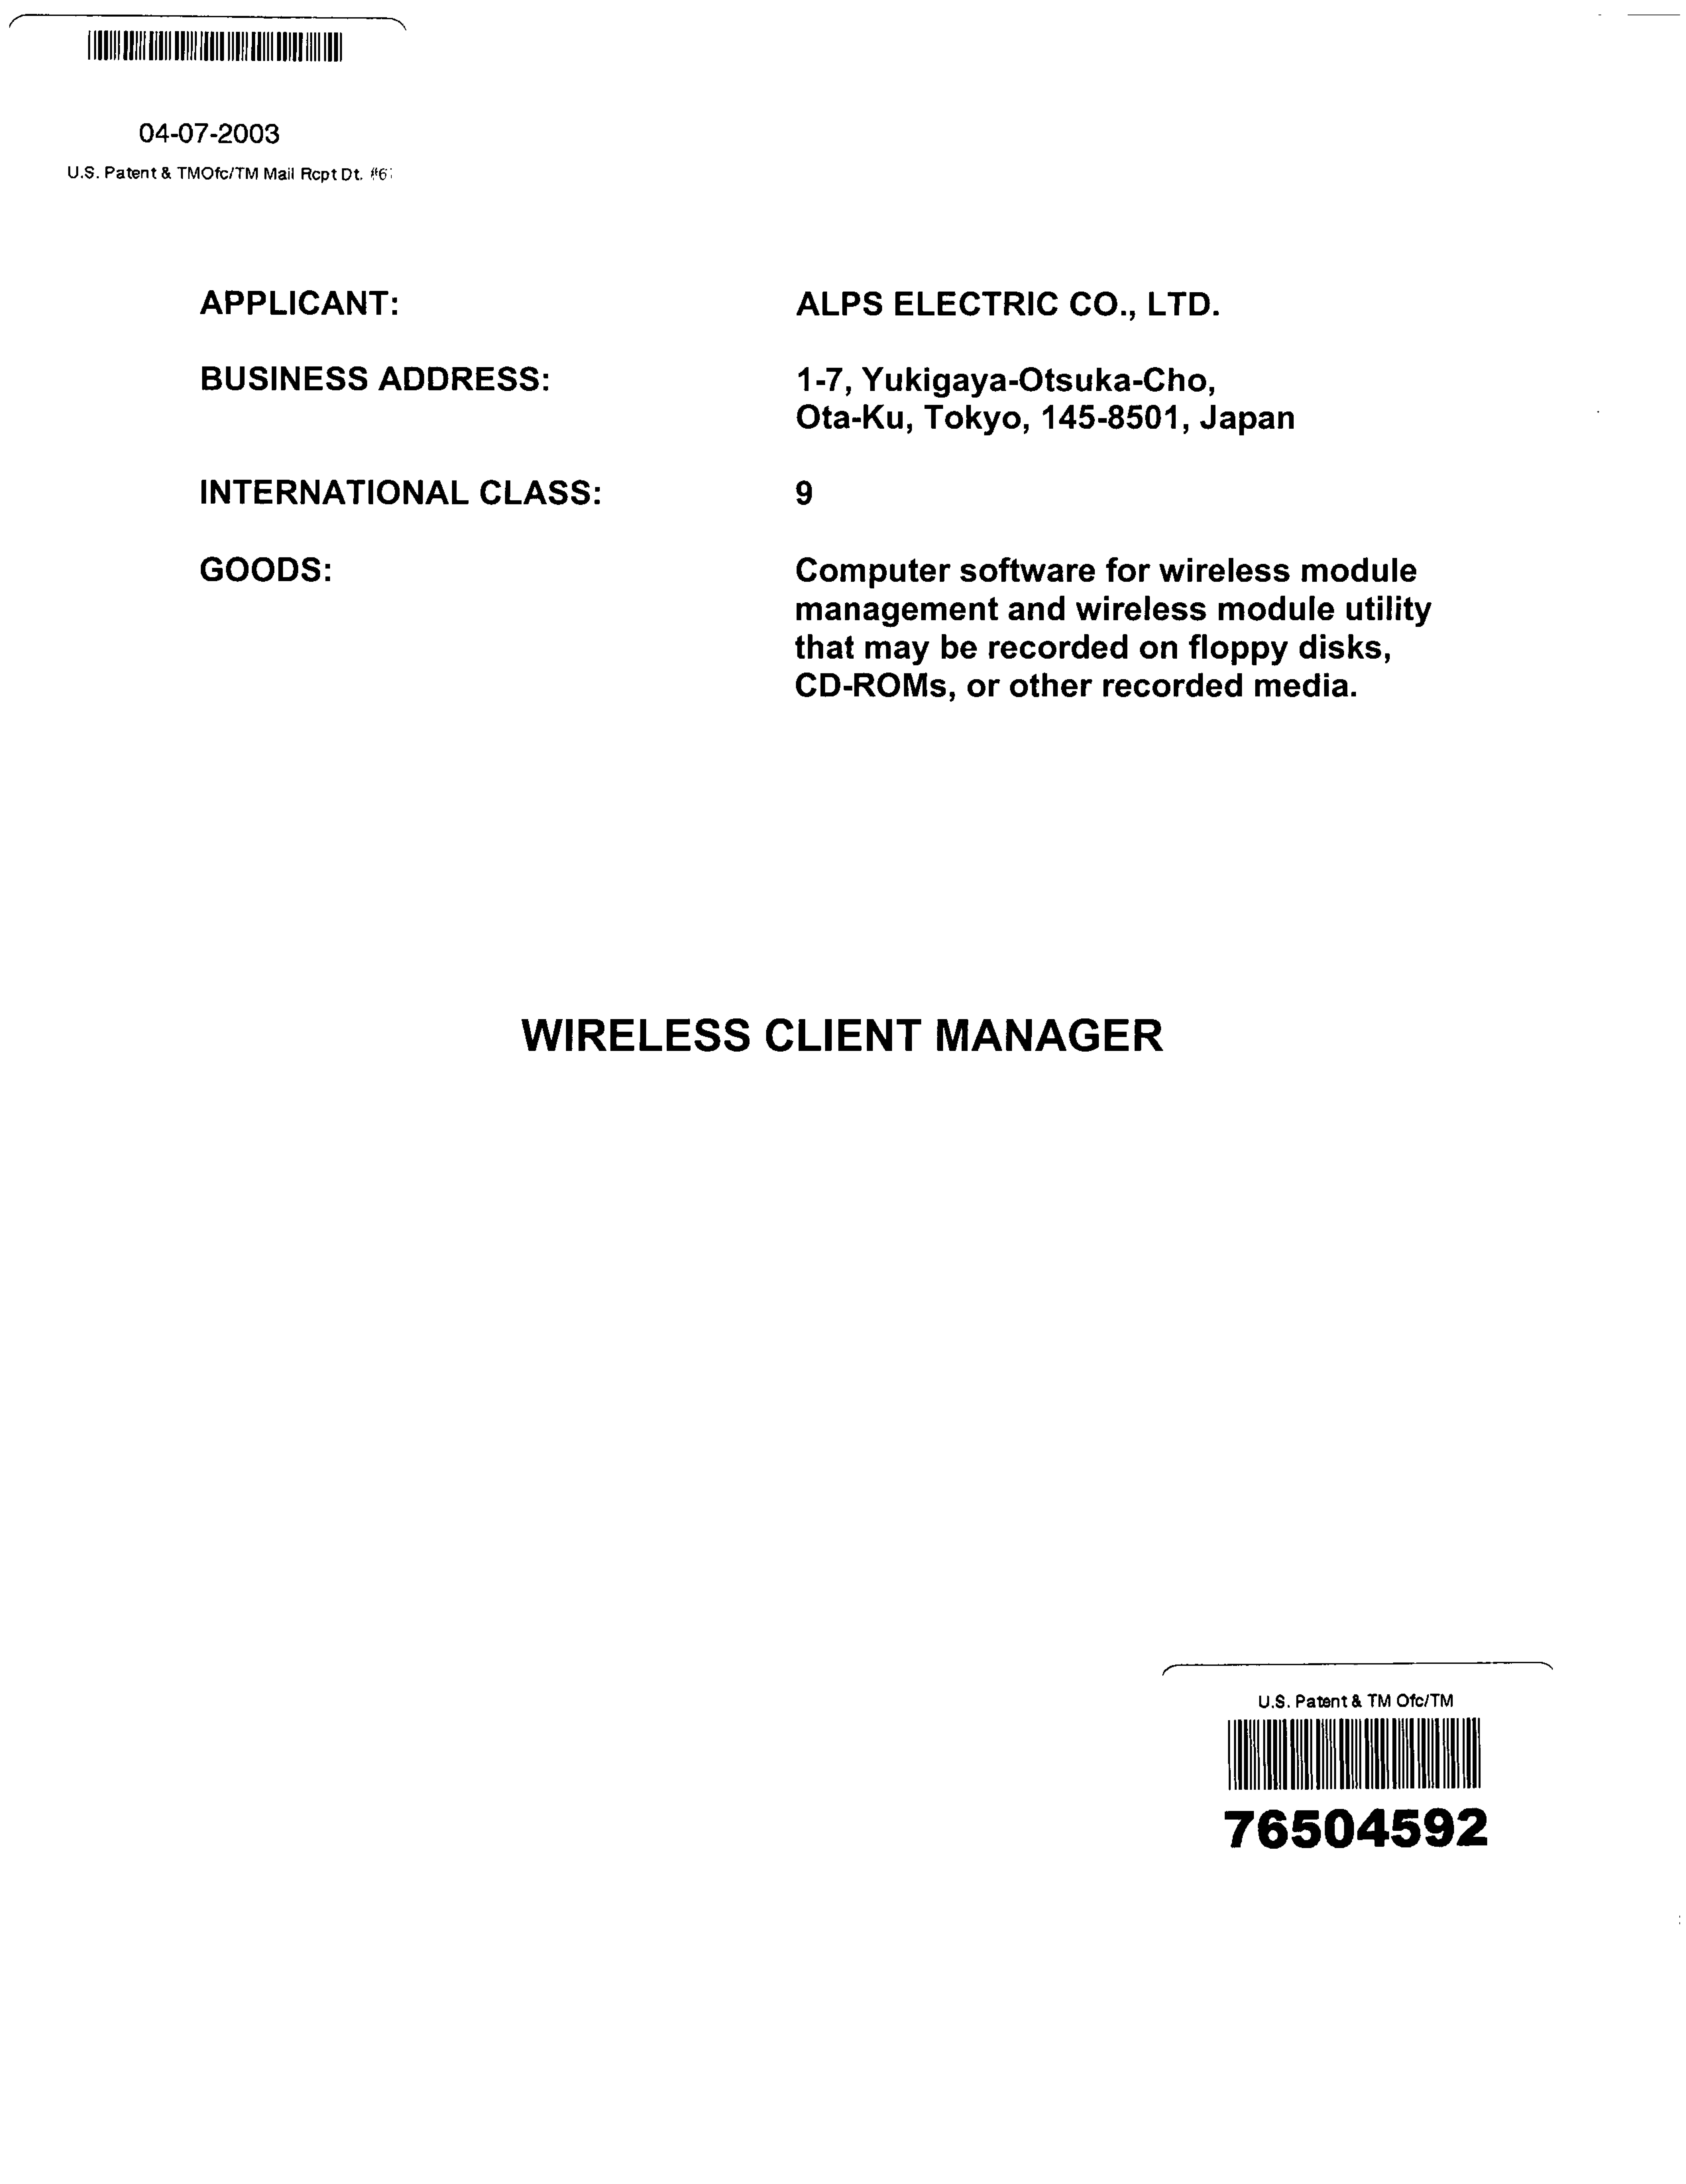  WIRELESS CLIENT MANAGER